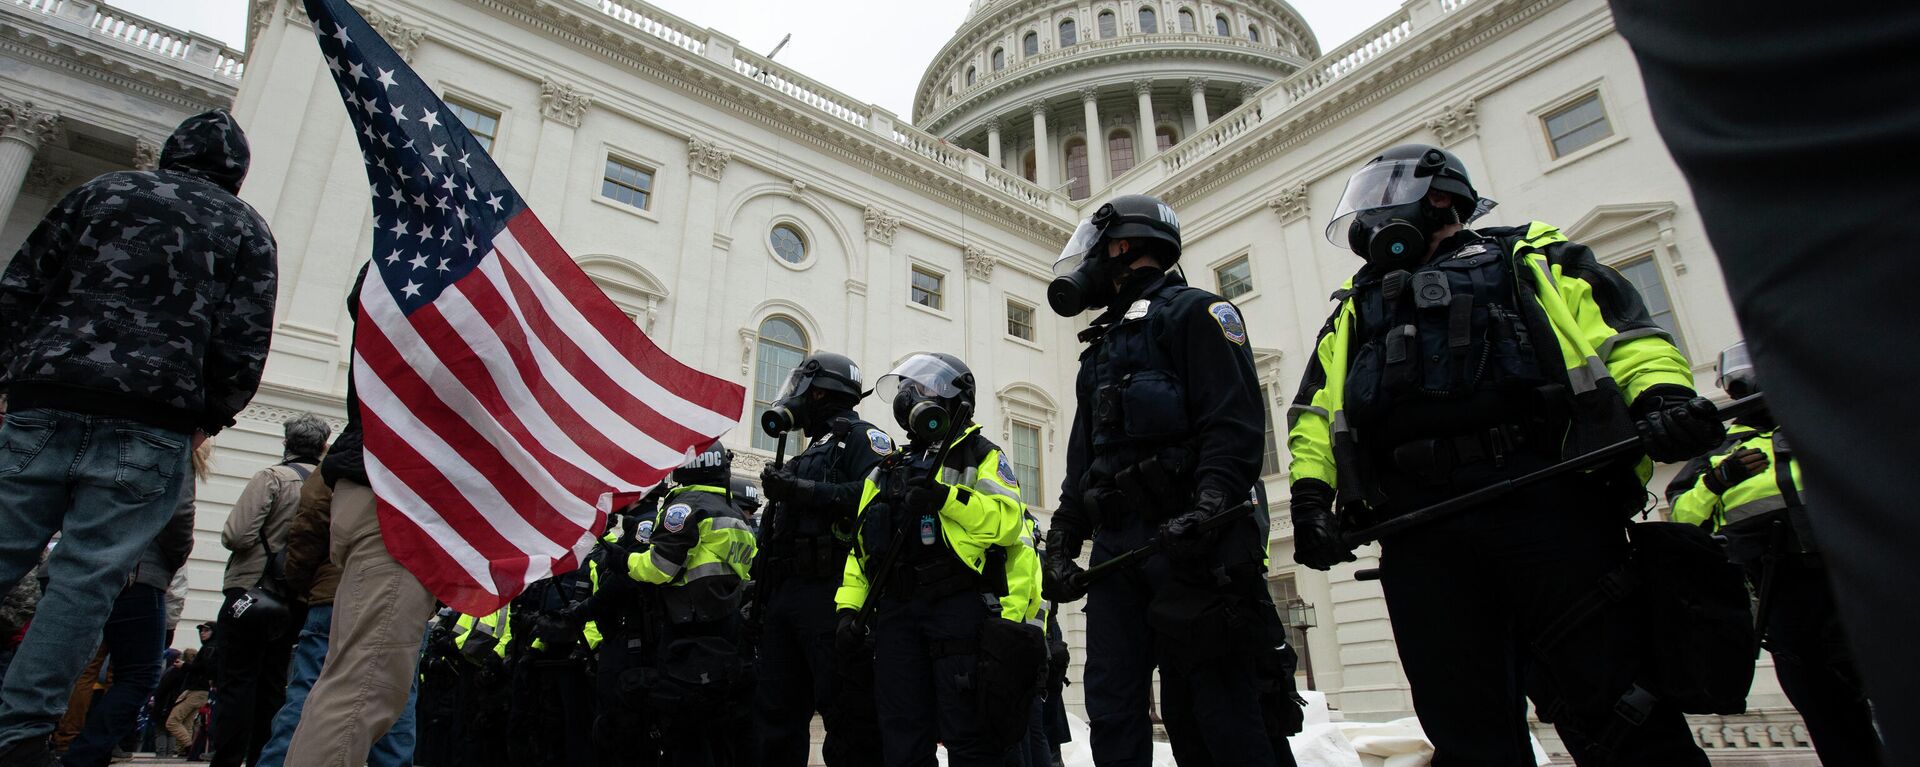 U.S. Capitol Police officers push back rioters who were trying to break into the U.S. Capitol on Jan. 6, 2021, in Washington. - Sputnik International, 1920, 27.12.2021